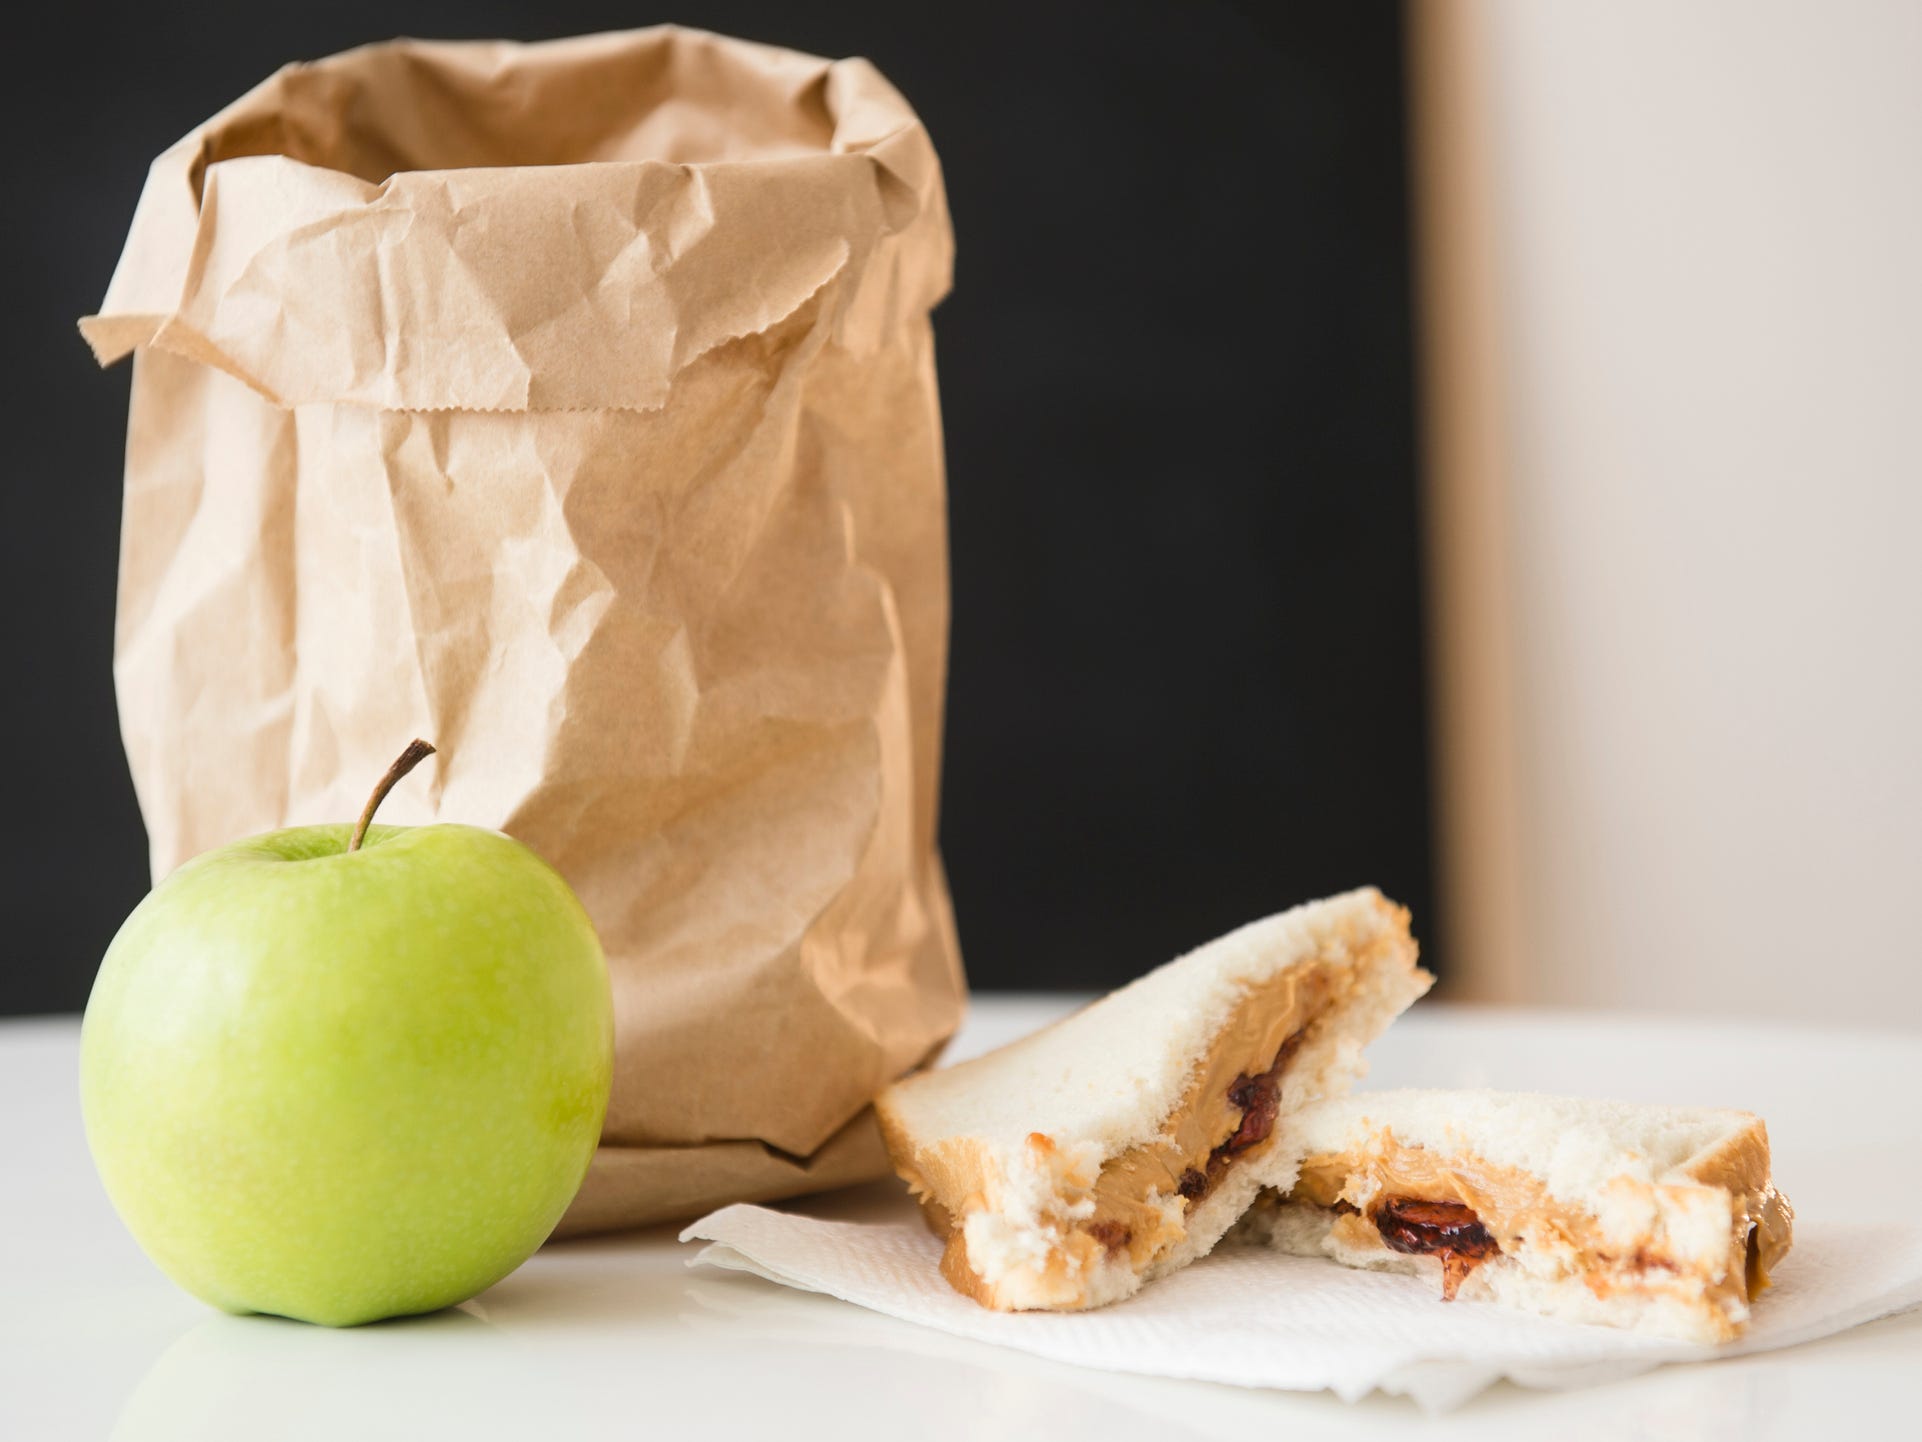 brown paper bag on a table with an apple and a pb&j